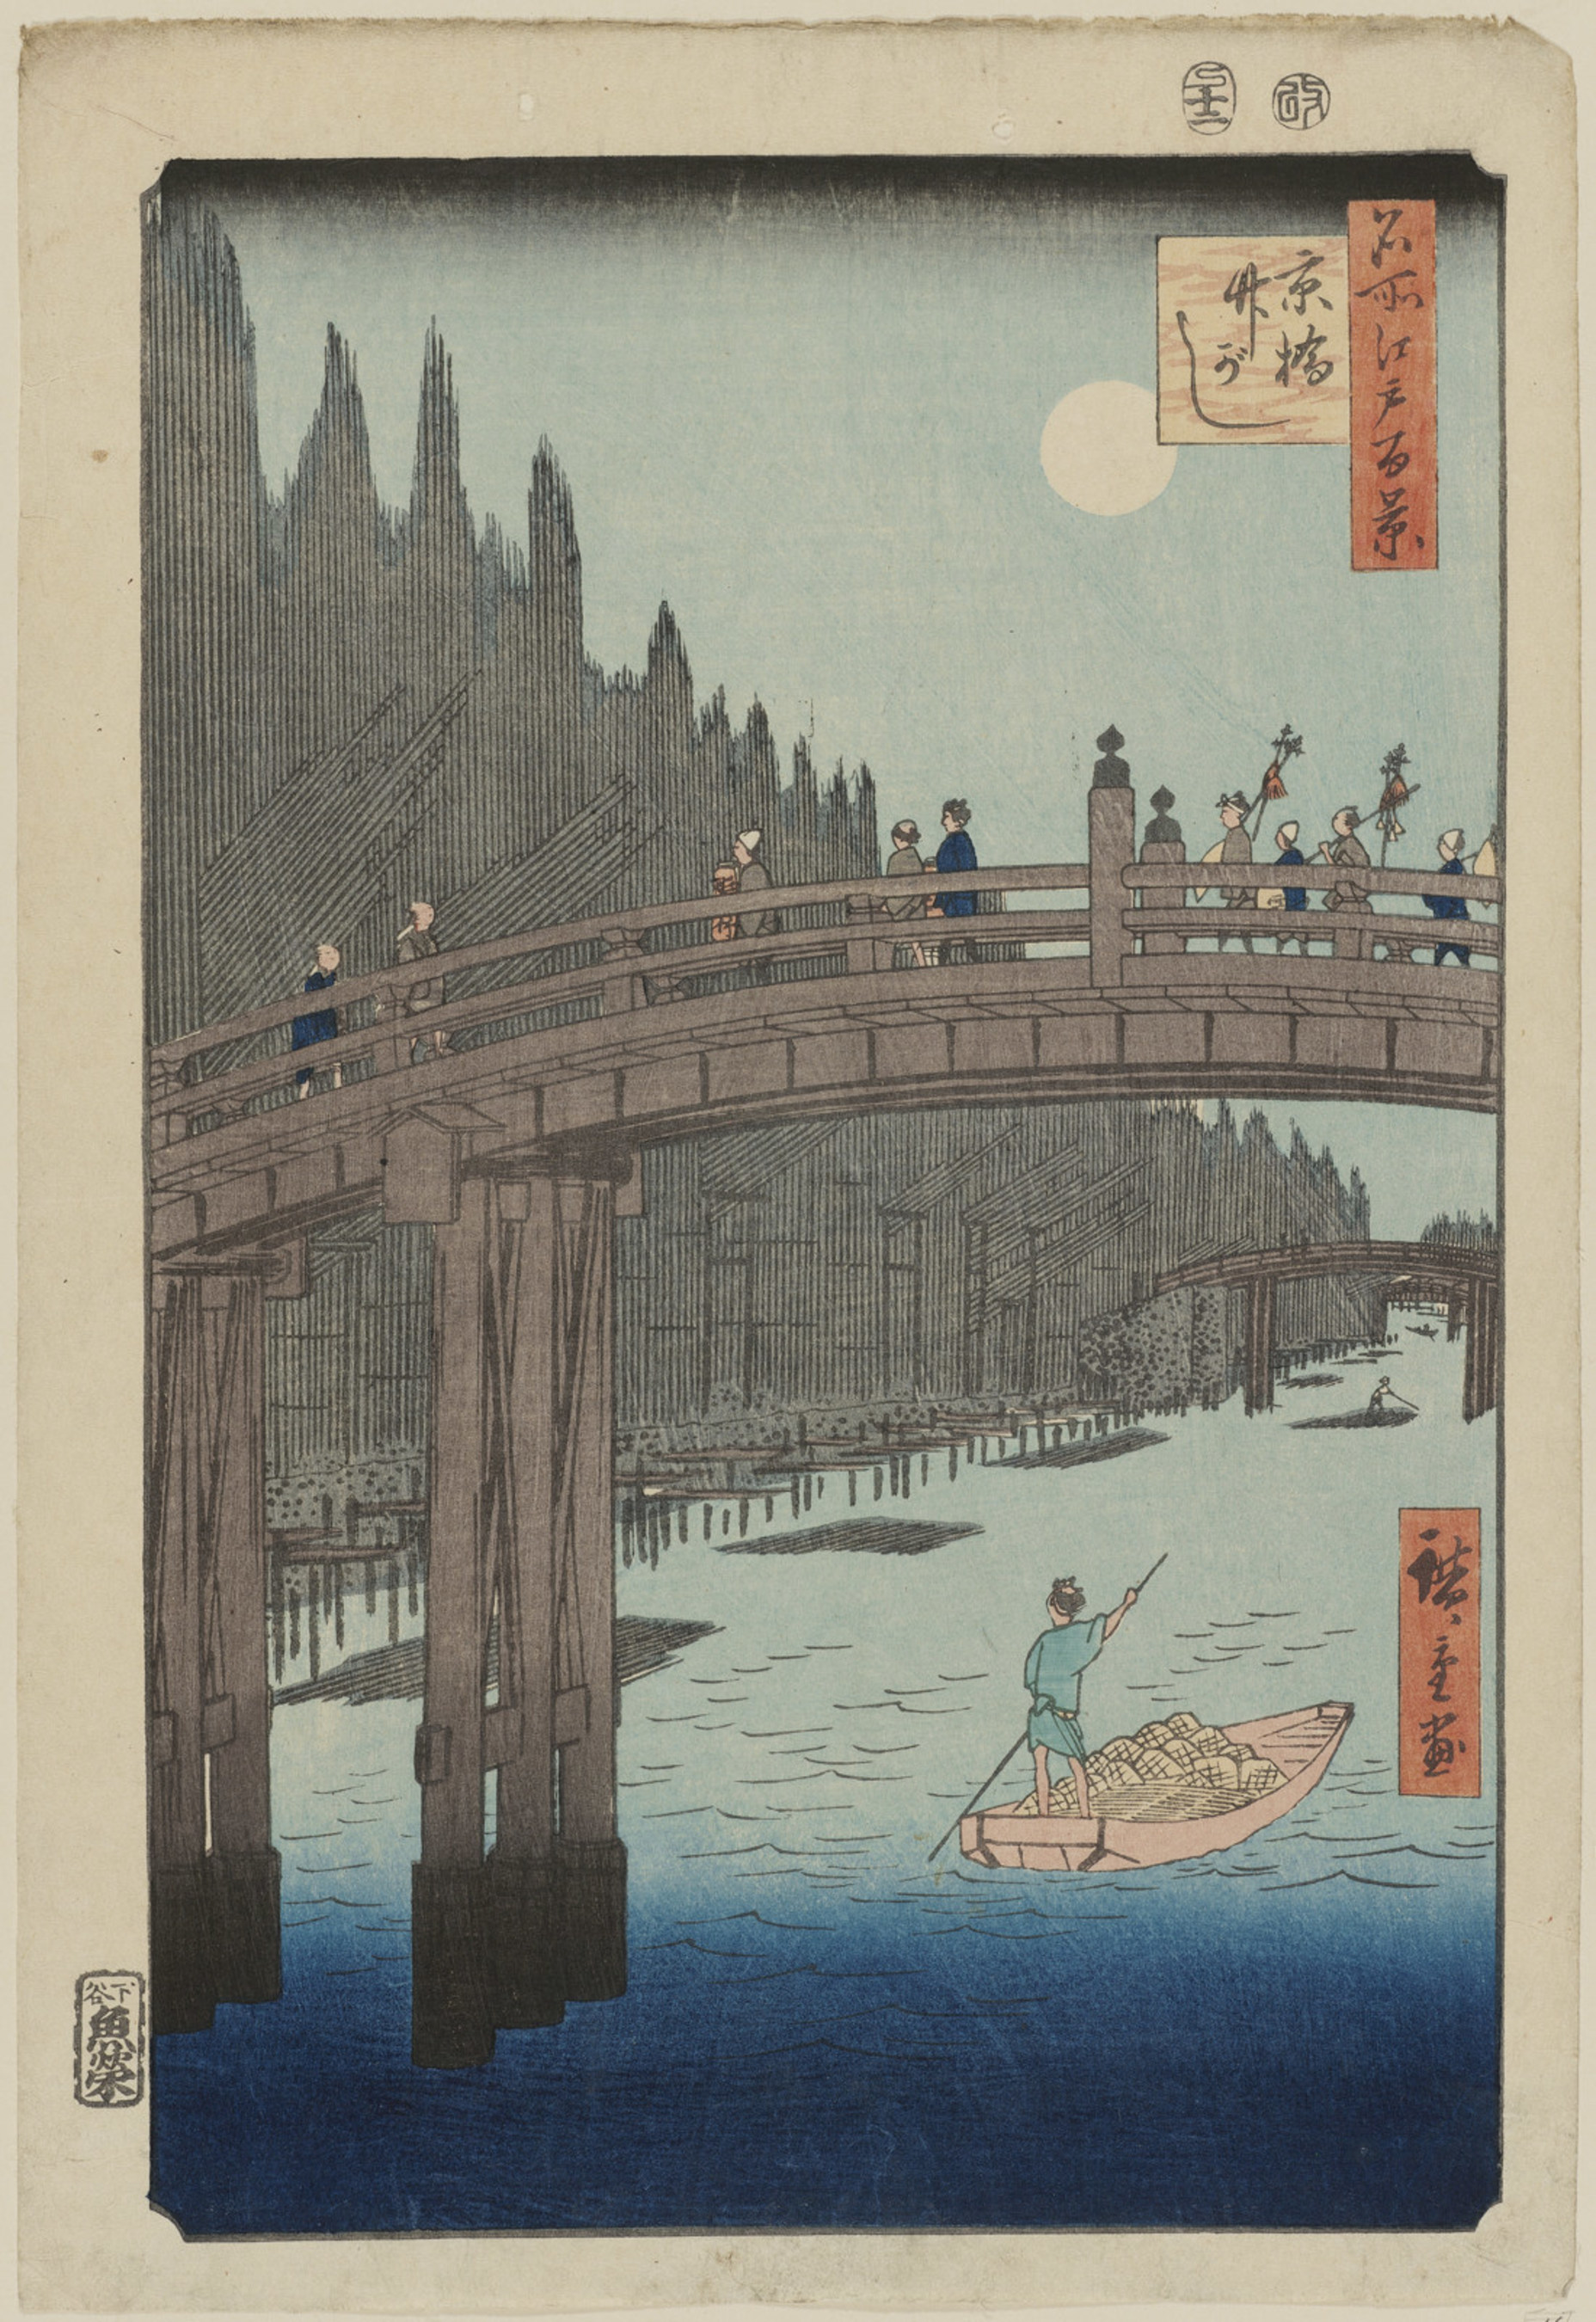 Bamboo Yards, Kyobashi Bridge, from the series One Hundred Famous Views of Edo, 1857, by Utagawa Hiroshige (Japanese, 1797-1858). Woodblock print; ink and color on paper. Museum of Fine Arts, Boston, William Sturgis Bigelow Collection, 11.26350. Photograph, 2015, MFA, Boston.